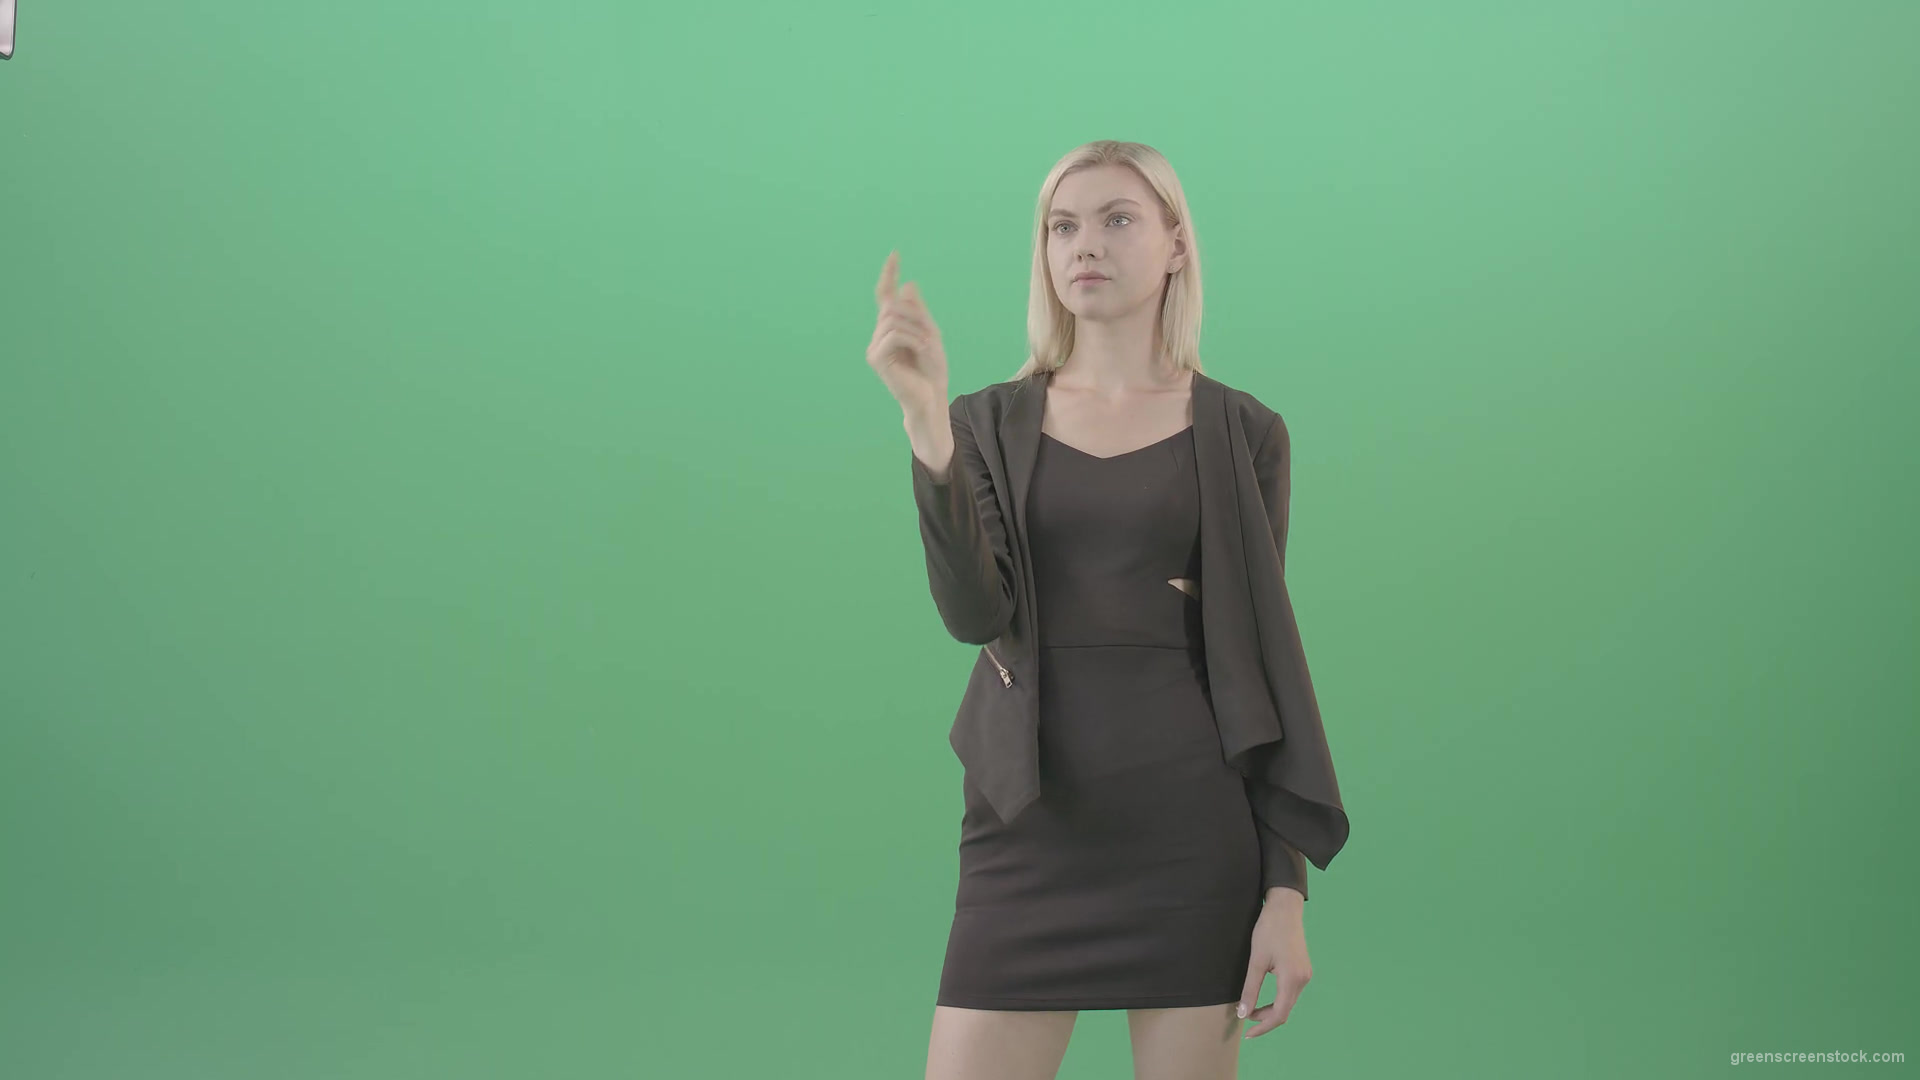 Blondie-shopping-in-virtual-store-on-touch-screen-in-green-screen-studio-4K-Video-Footage-1920_008 Green Screen Stock